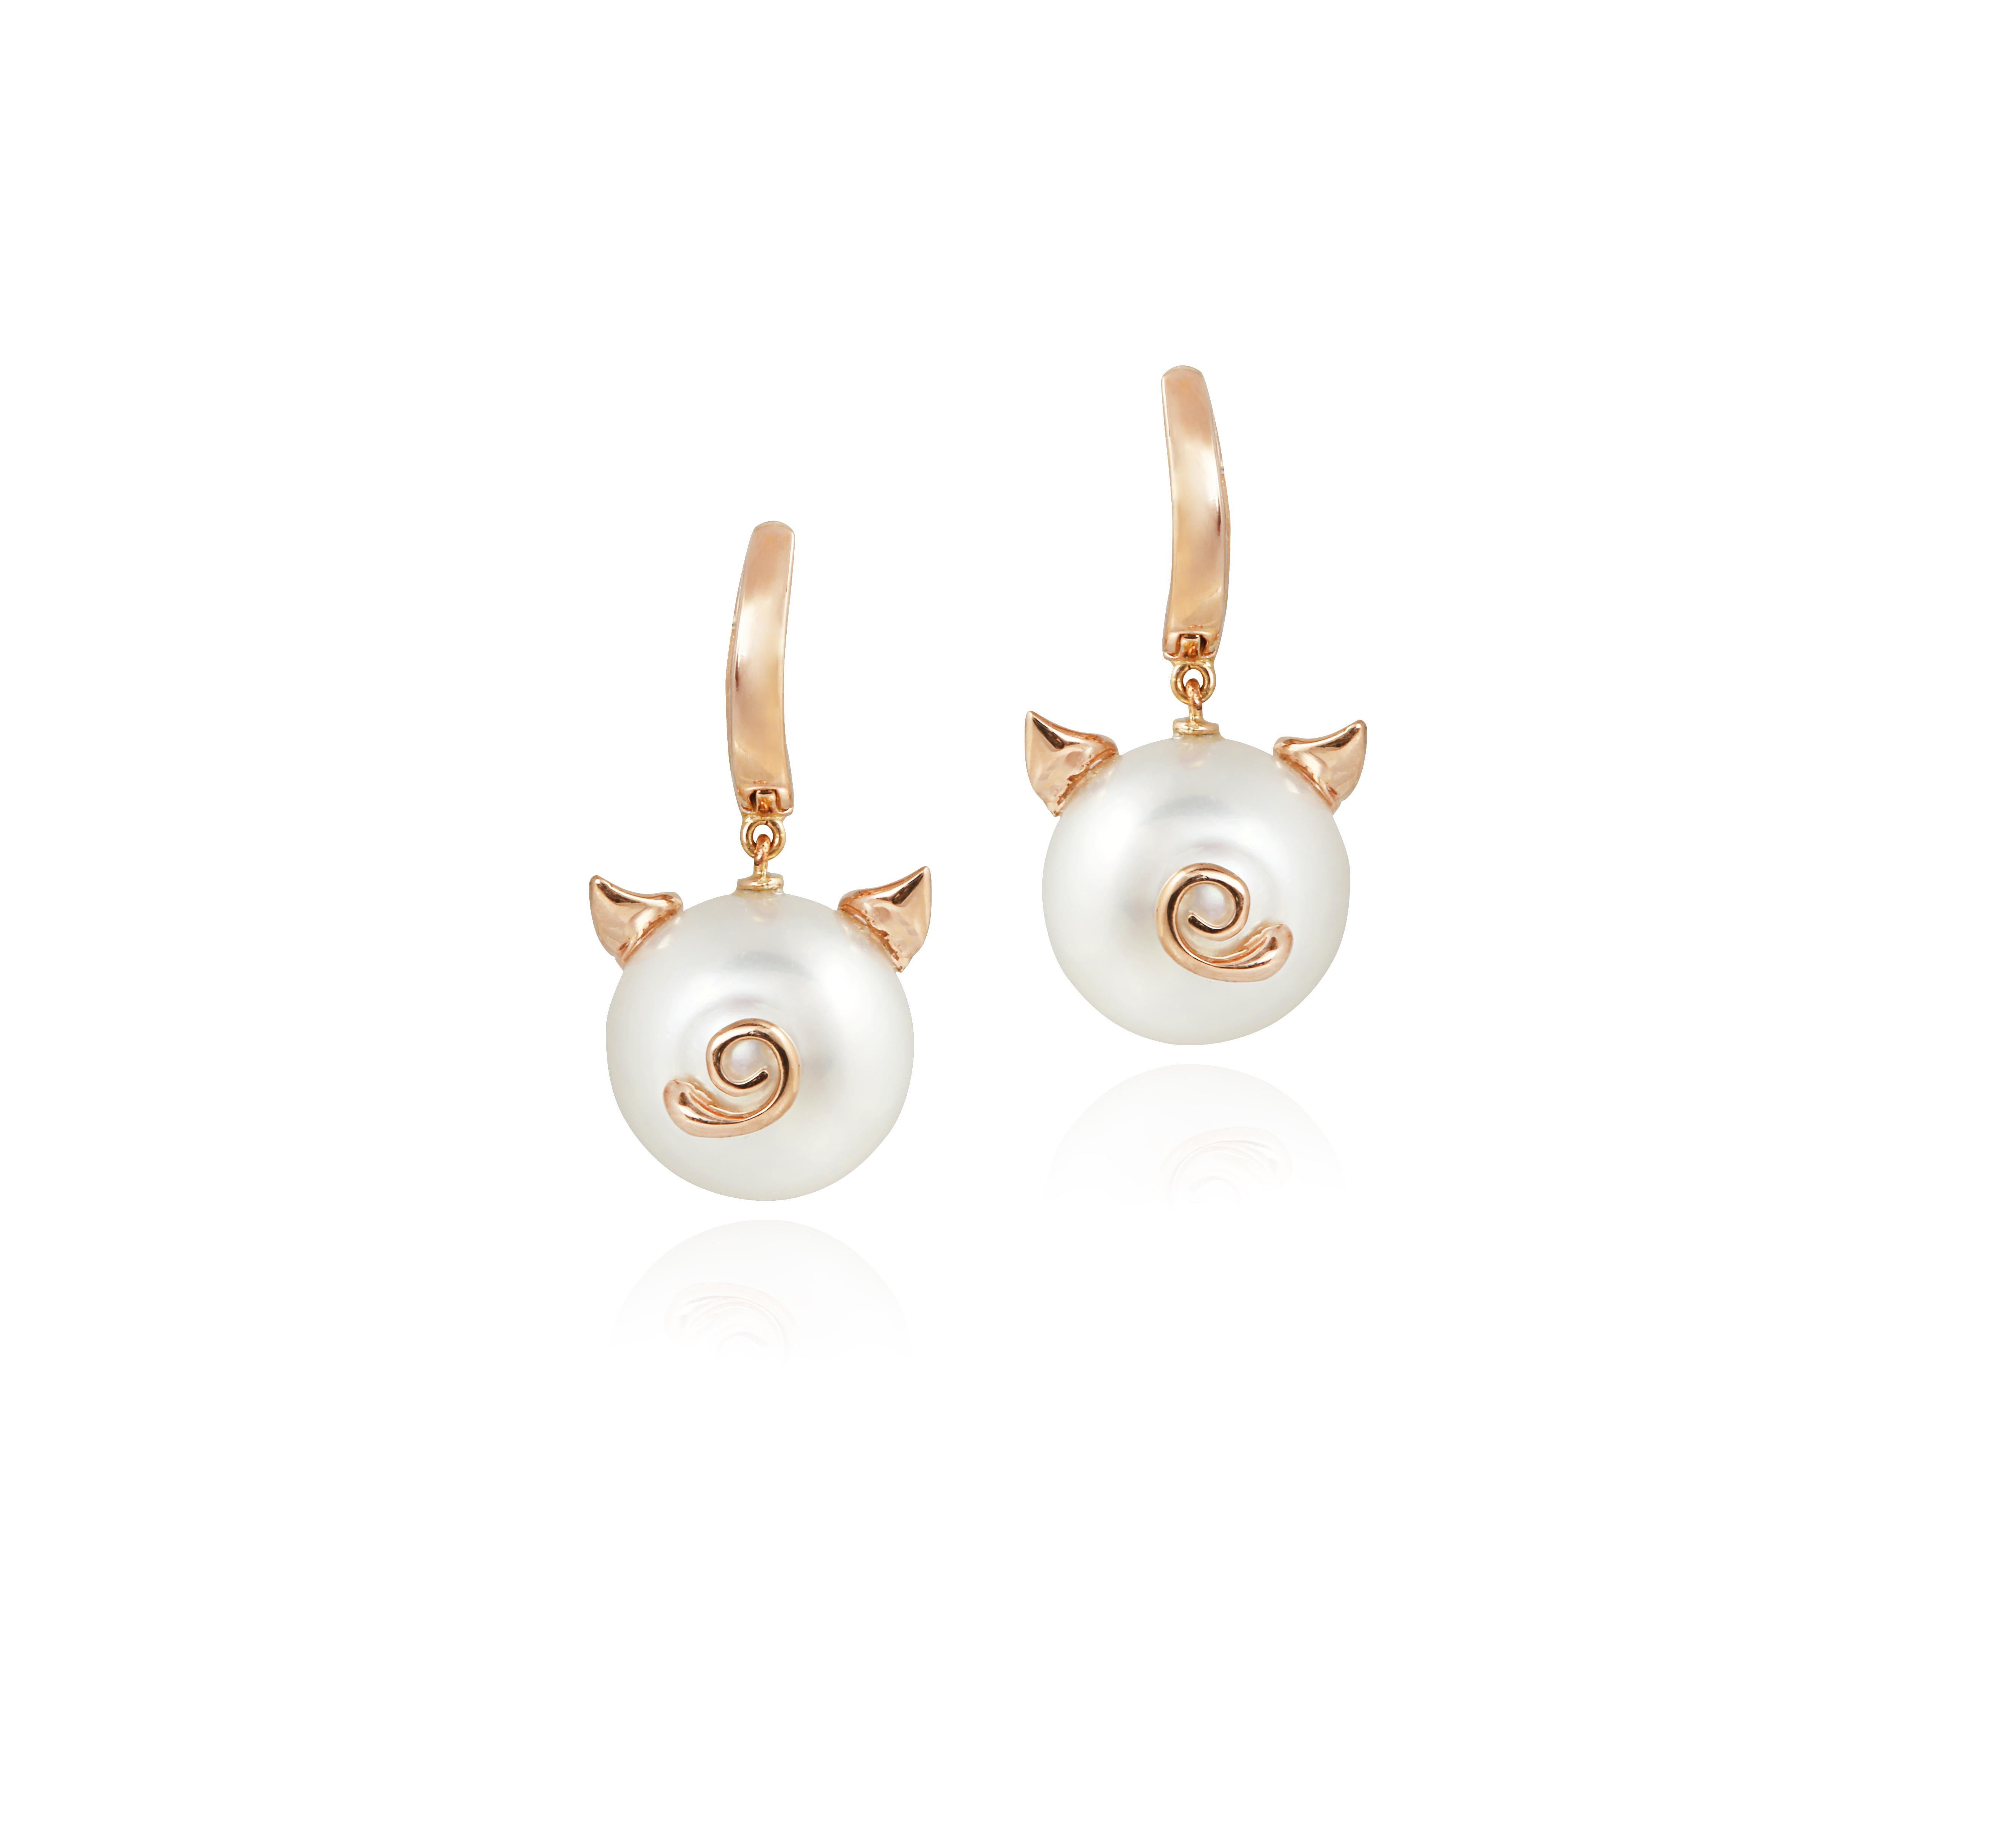 These charming earrings are created using Australian South Sea Pearls measuring 13.8 mm in diameter, and carefully selected clean white diamonds set in 18K rose gold.  A spring back clip makes them easily comfortable to wear.   Very cute and